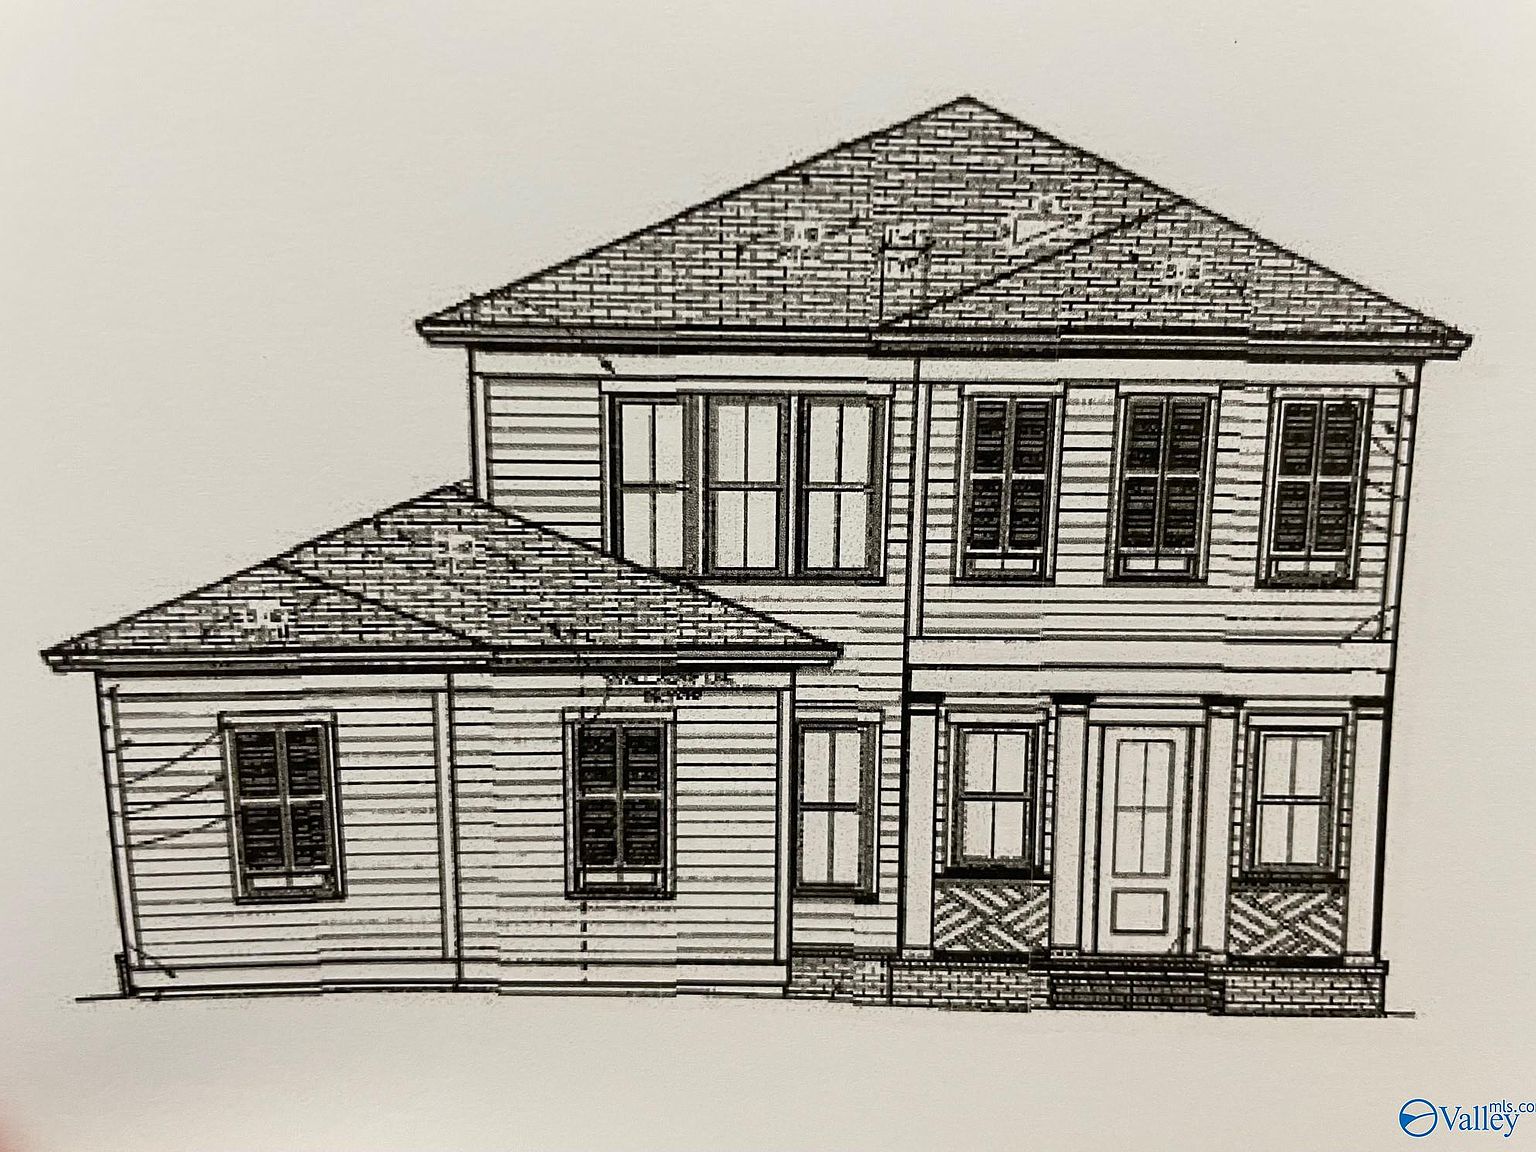 House Drawing  How To Draw A House Step By Step